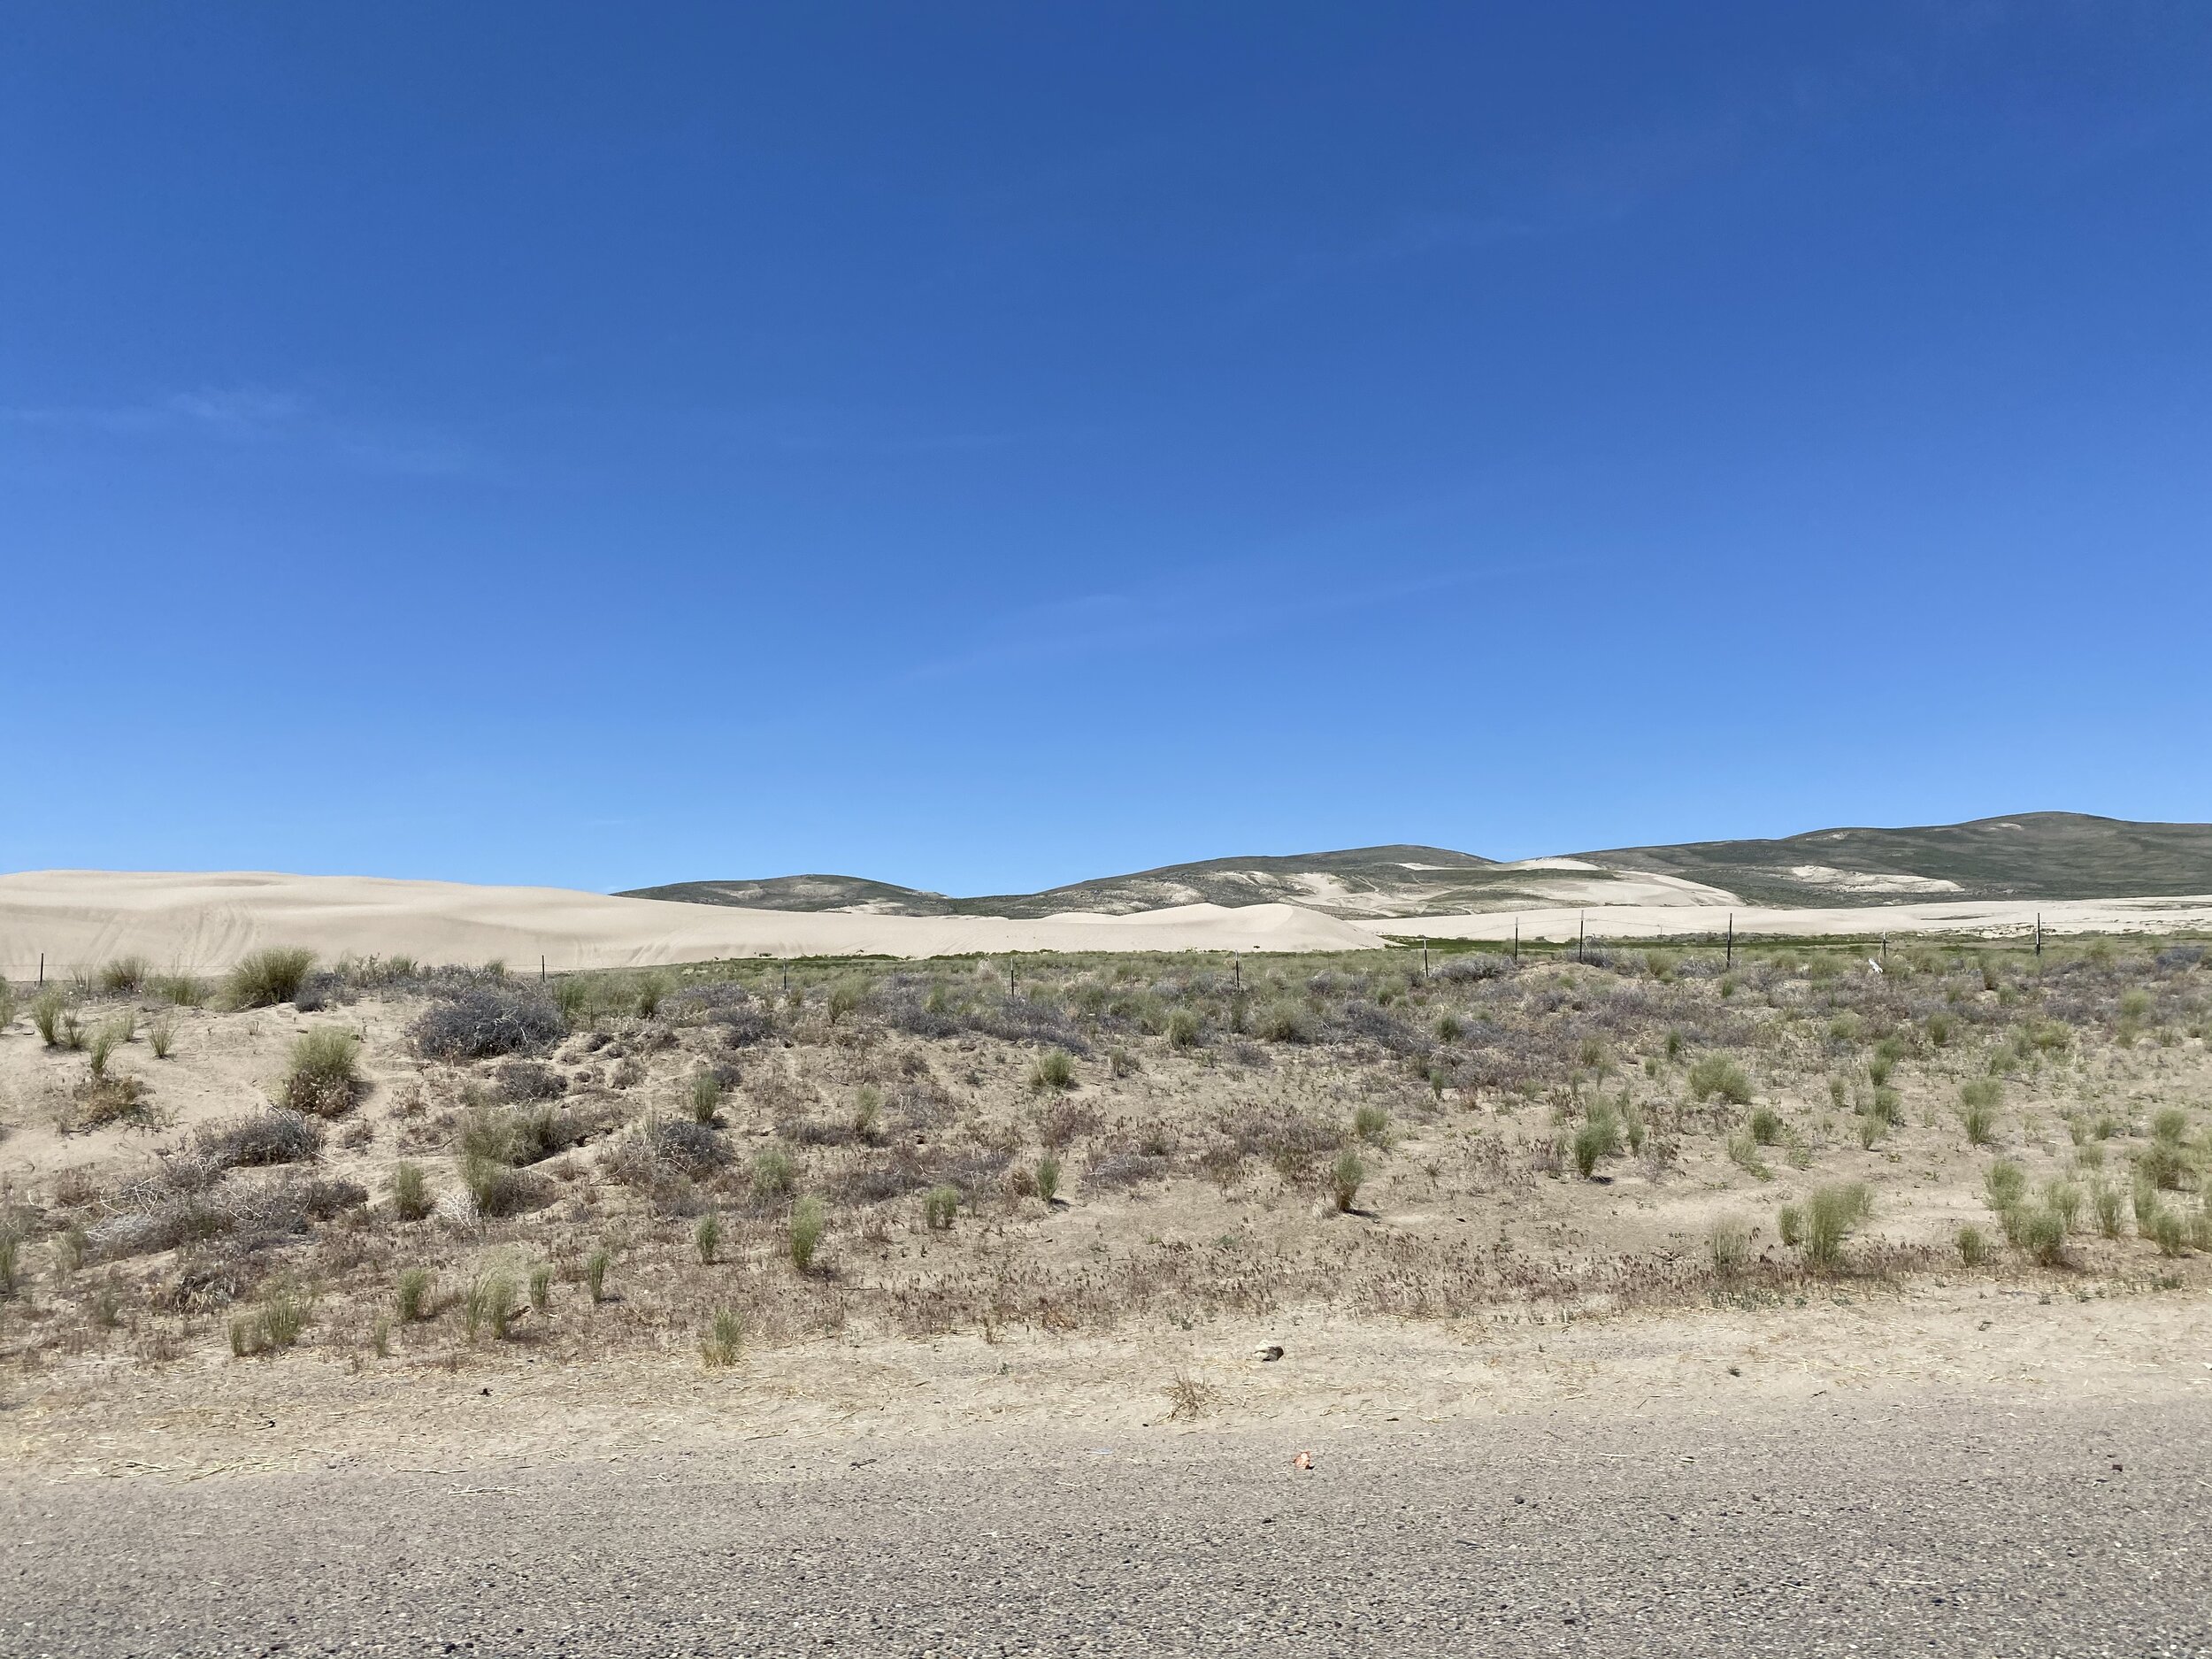 This small stretch of sand dunes near Winnemucca, Nevada was pretty cool!  Photo by Karen Boudreaux, June 4, 2021